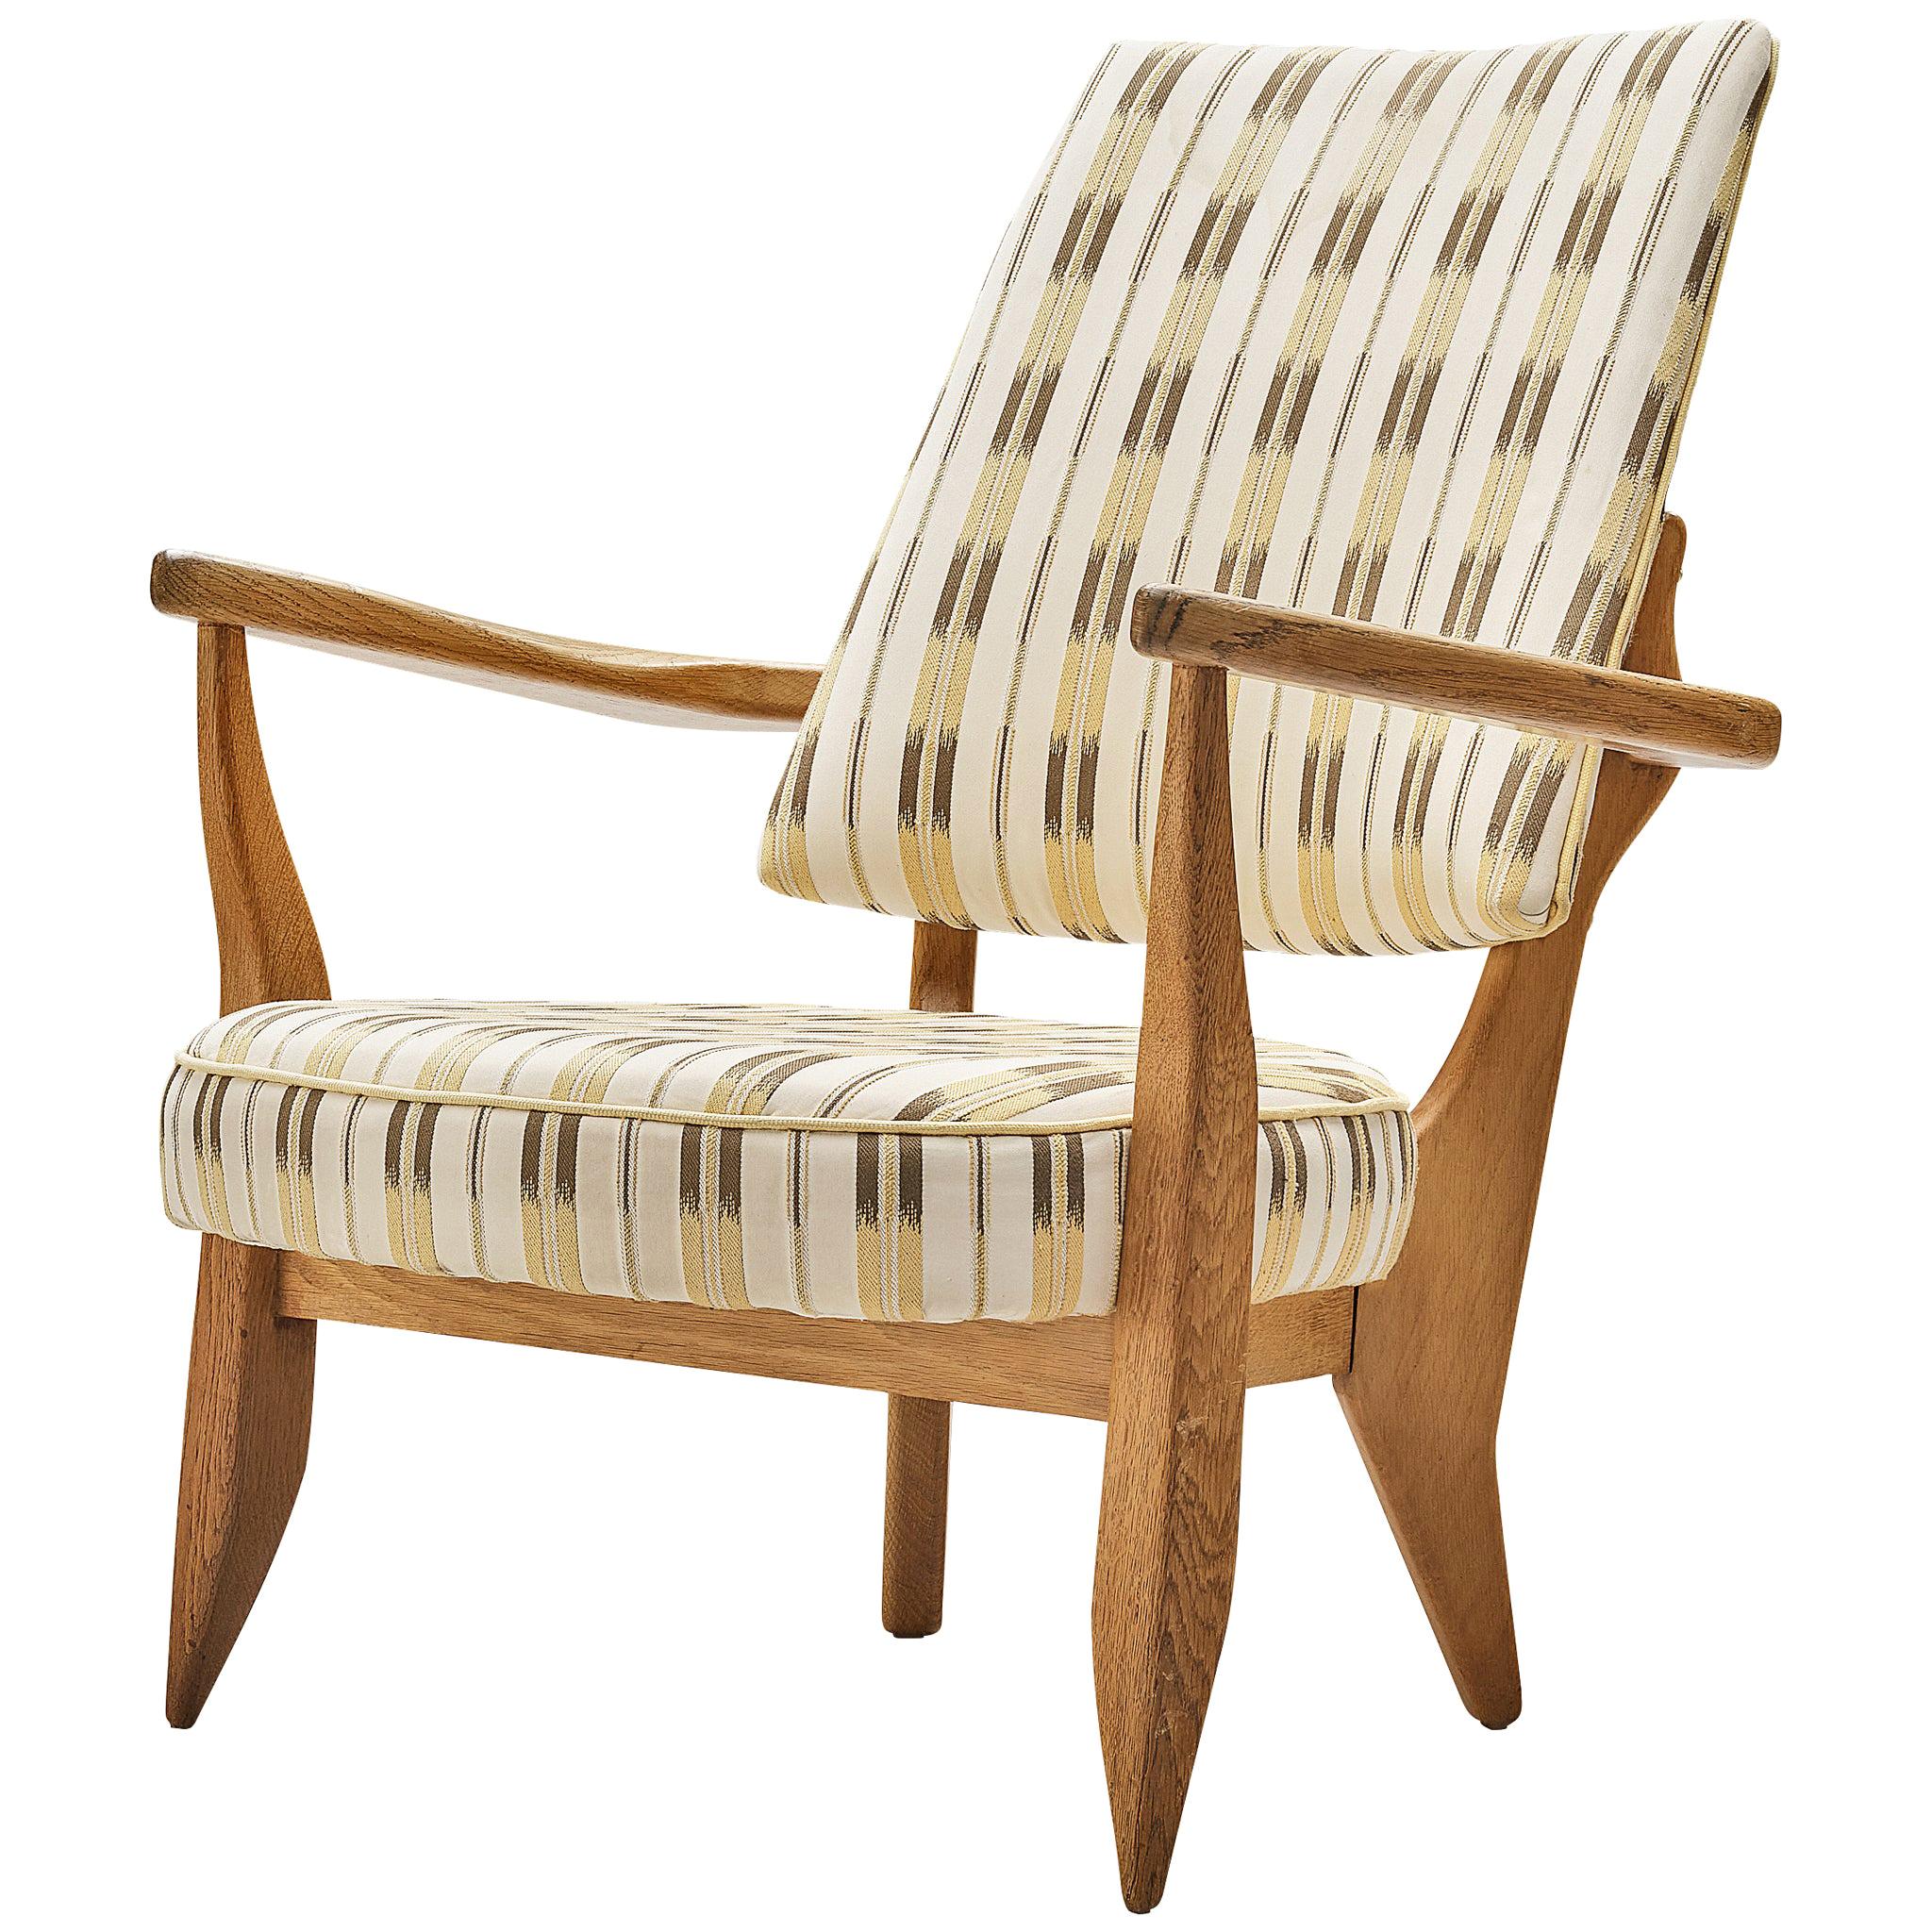 Guillerme et Chambron Lounge Chair in Oak with Patterned Upholstery